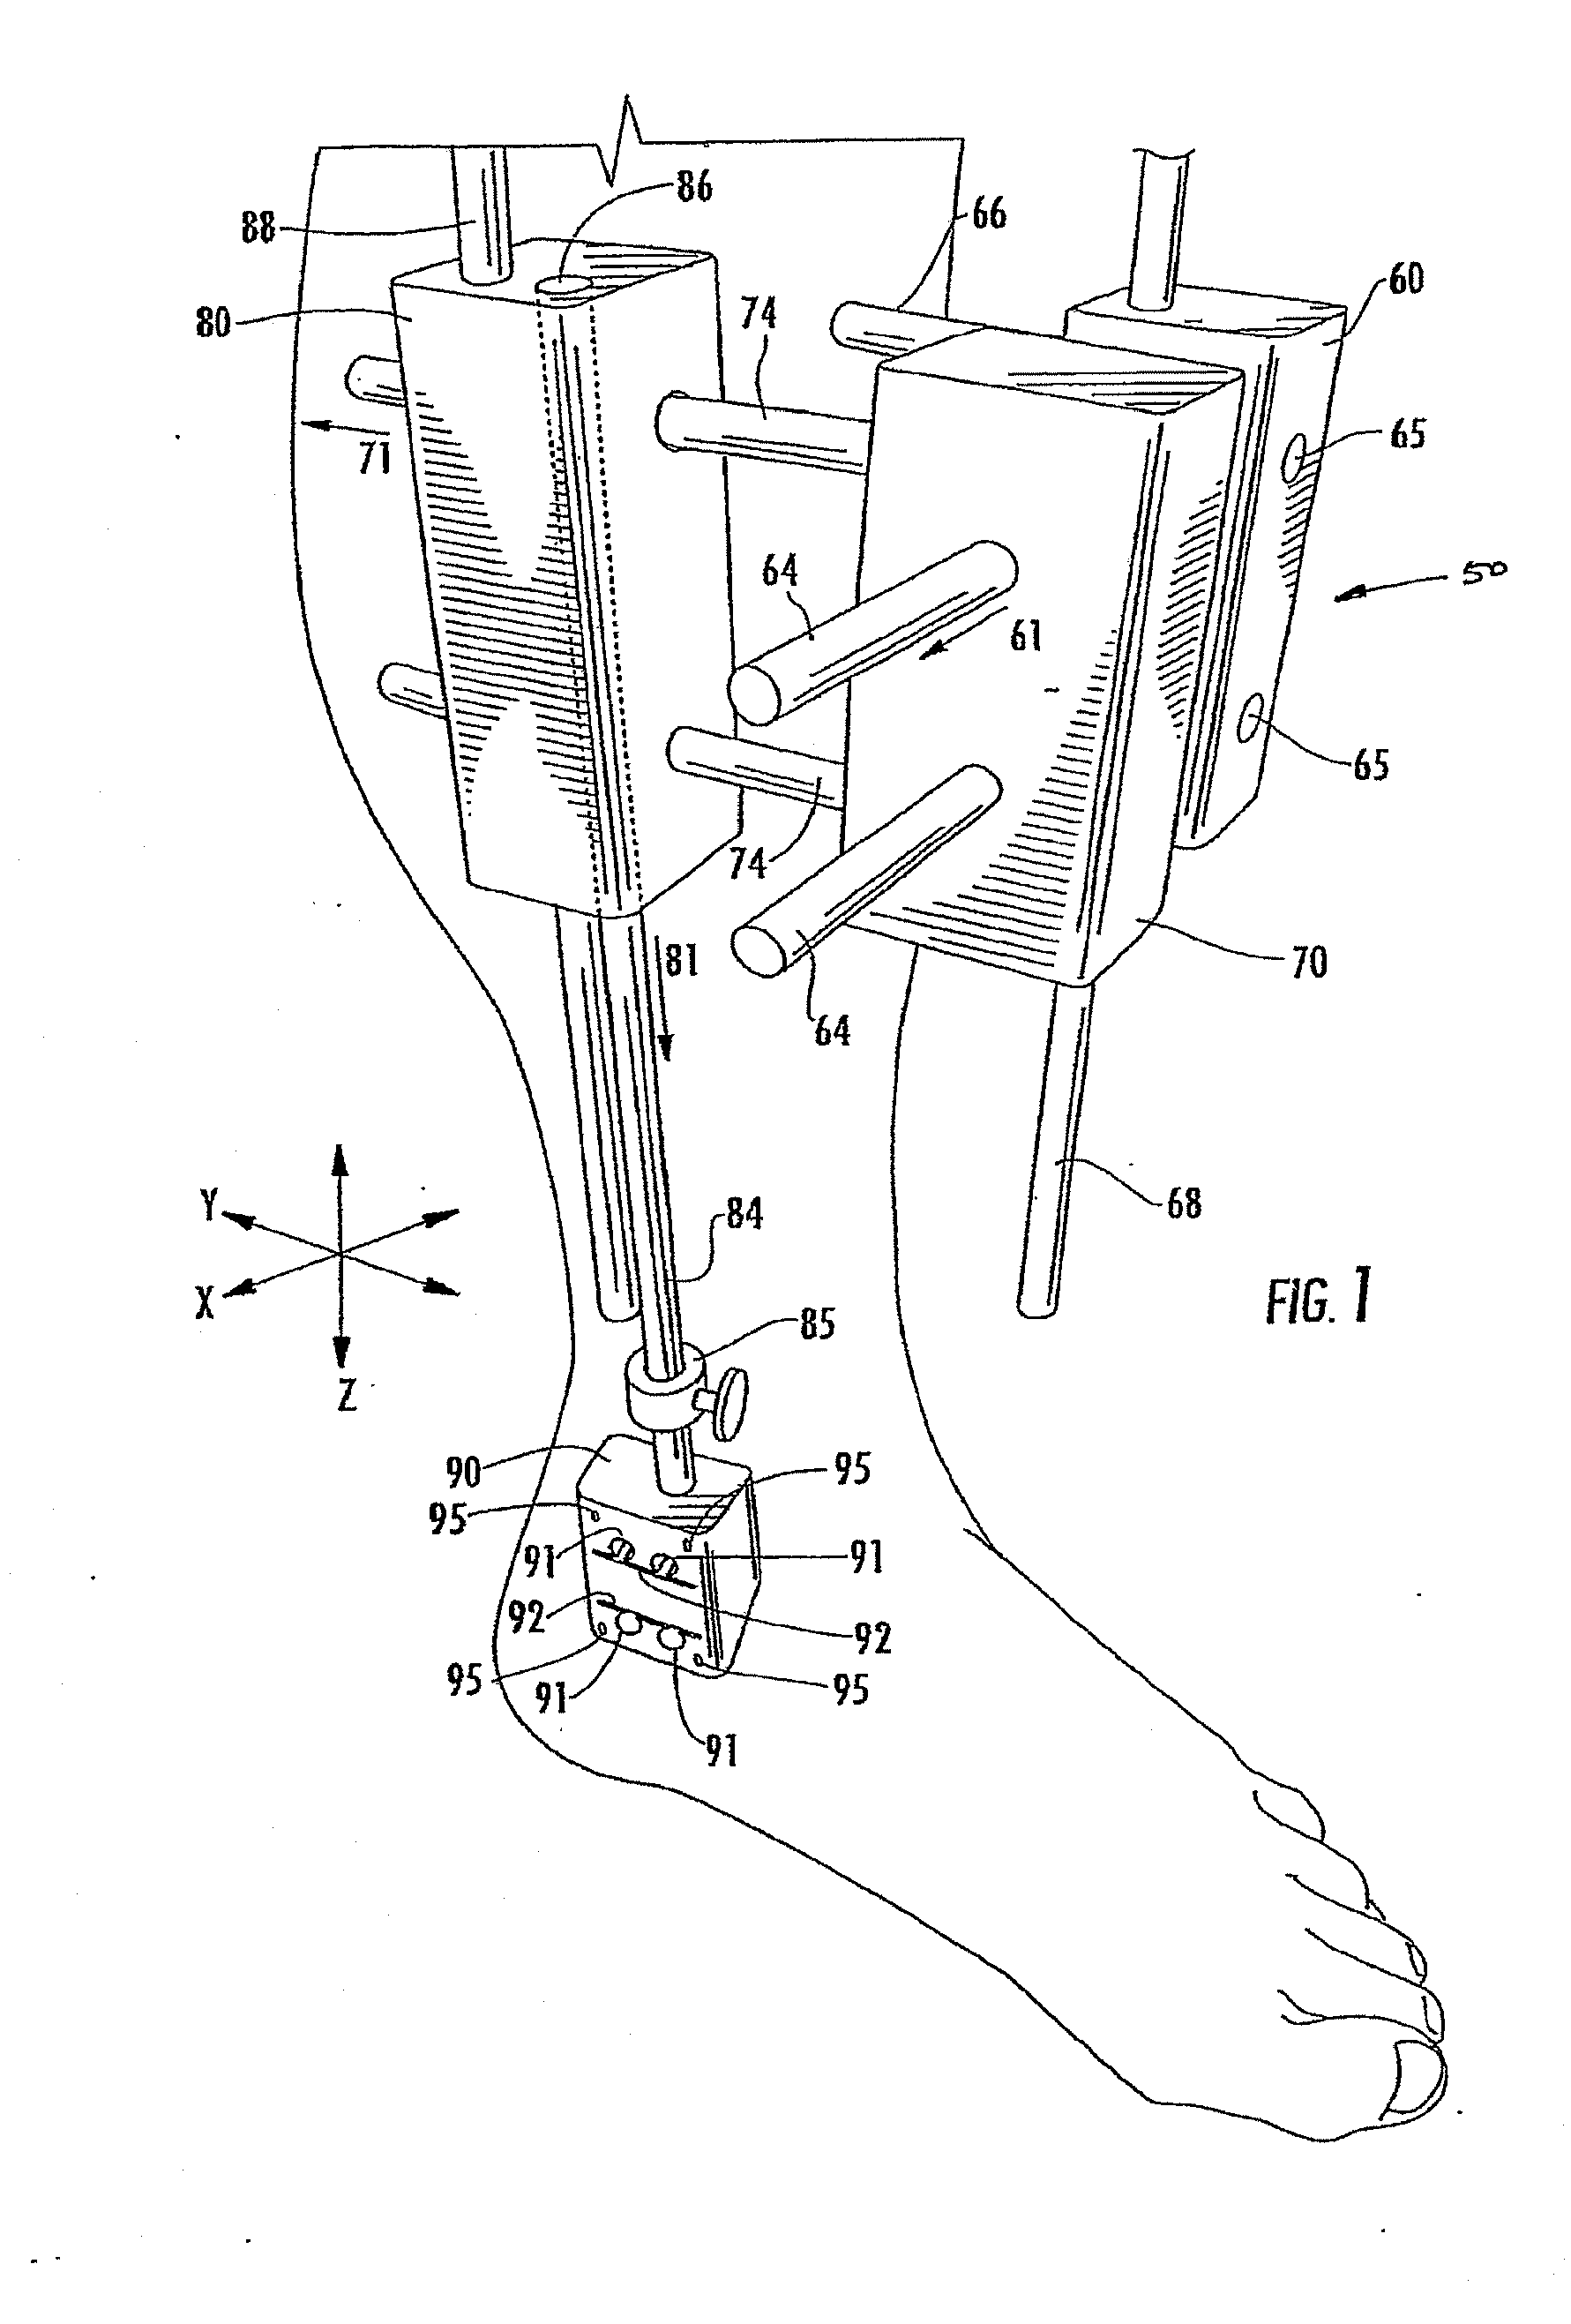 Method of Preparing an Ankle Joint for Replacement, Joint Prosthesis, and Cutting Alignmnet Apparatus for Use in Performing an Arthroplasty Procedure